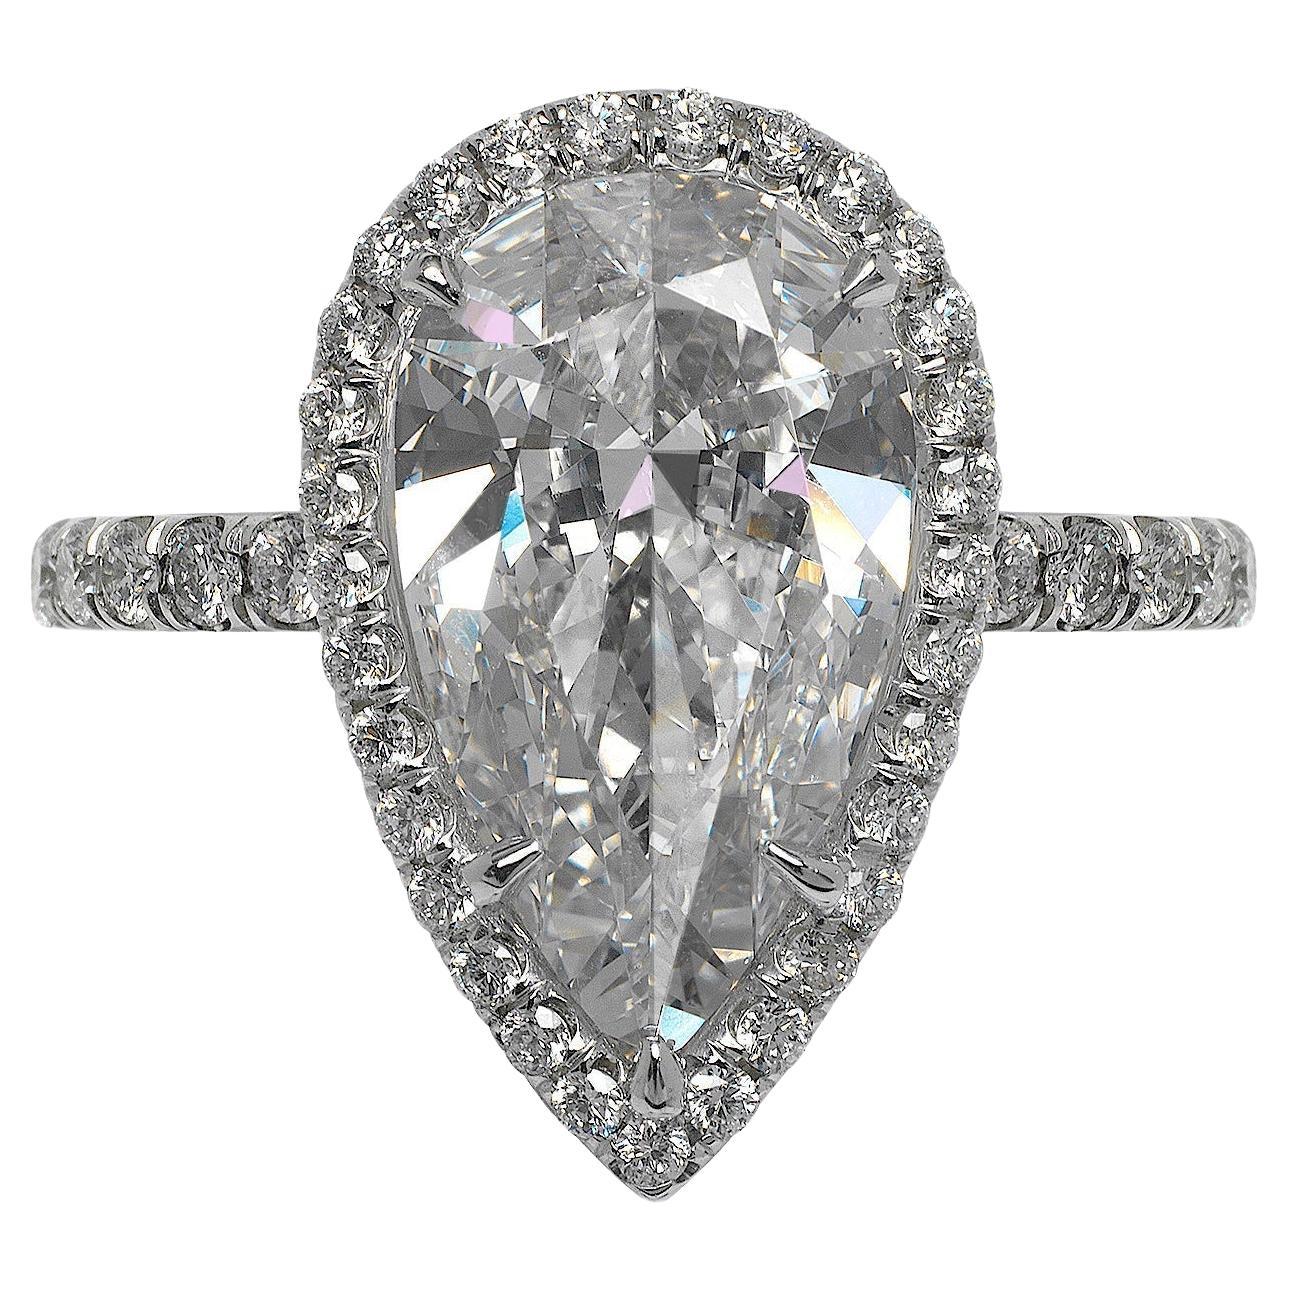 5 Carat Pear Shape Diamond Engagement Ring GIA Certified FP VS1 For Sale